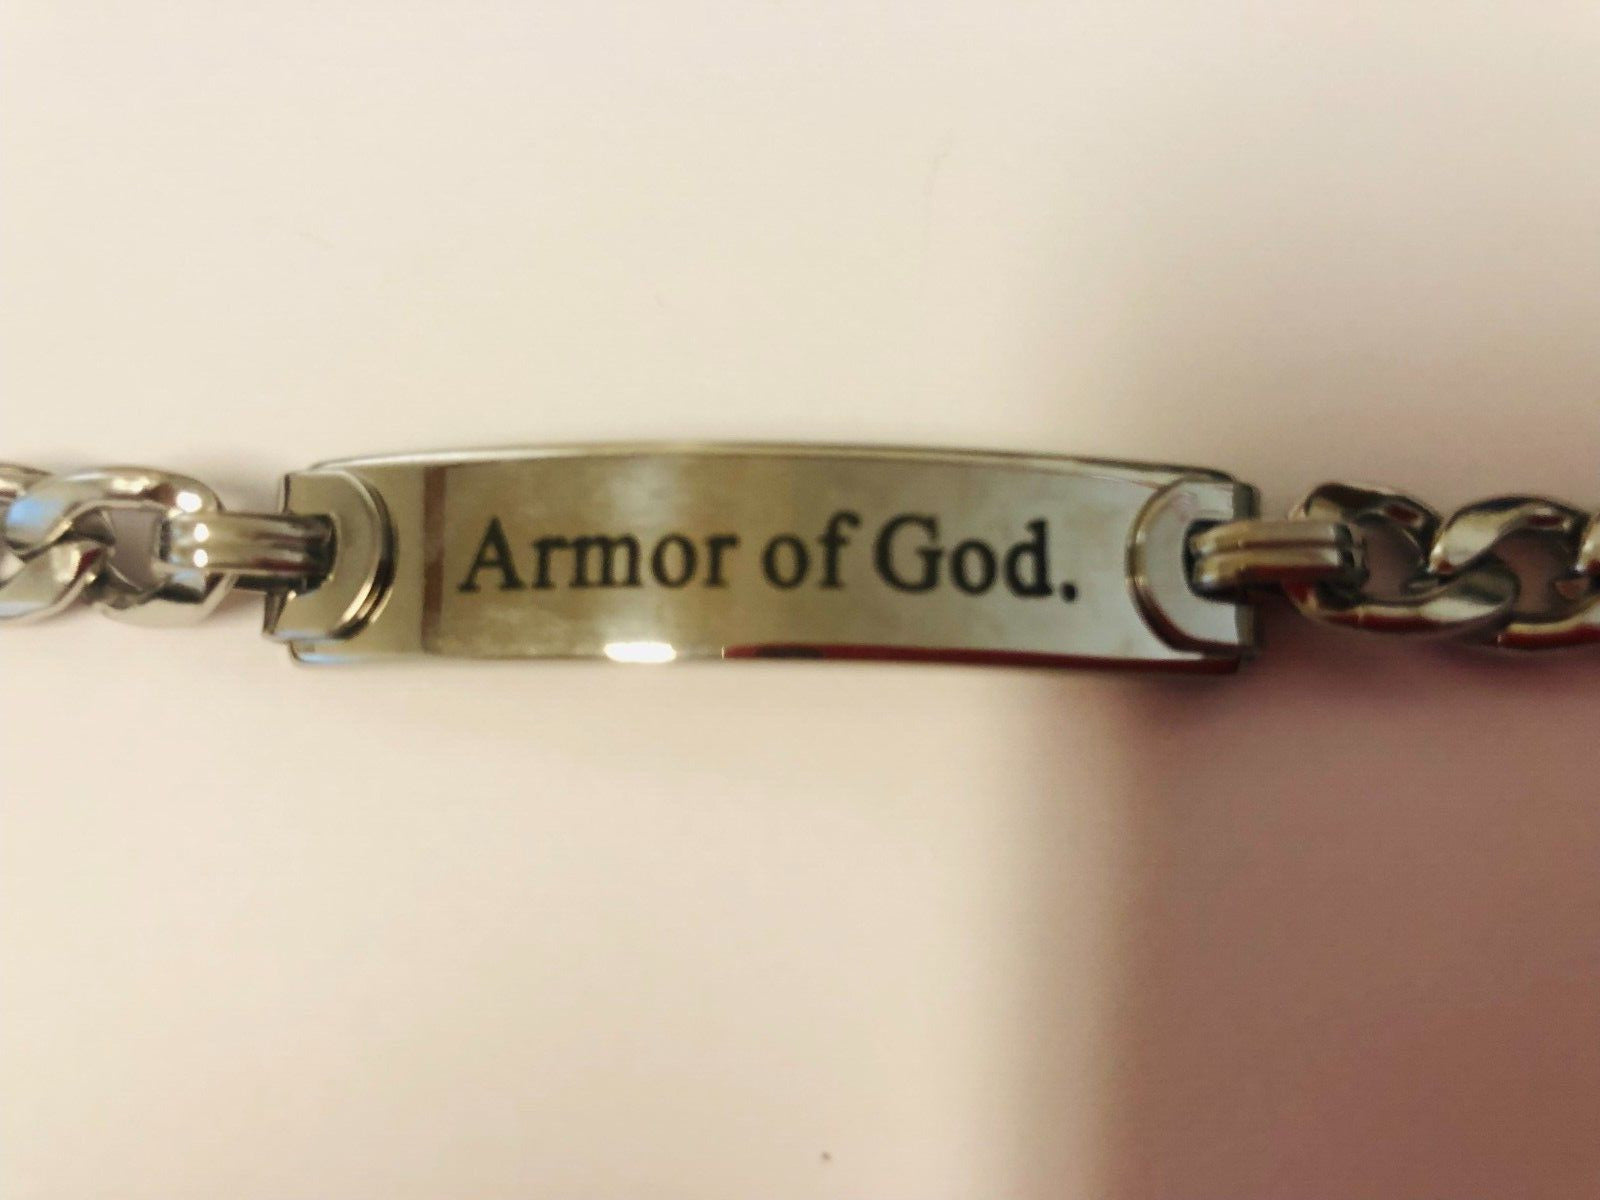 Stainless Steel  Armor of God  8  L Bracelet, New - Bob and Penny Lord